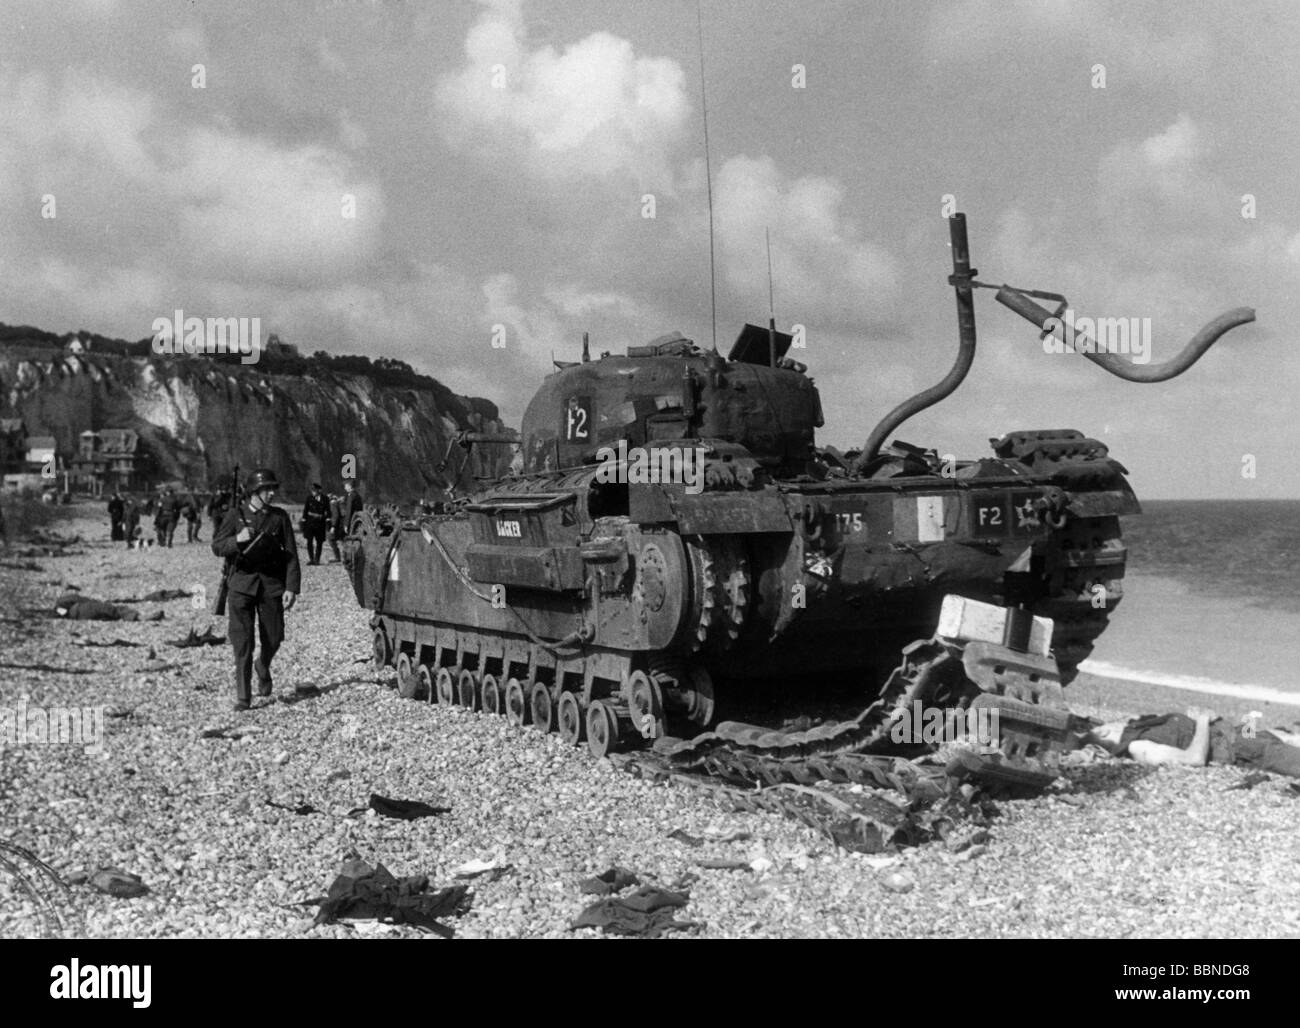 events, Second World War / WWII, France, Dieppe, 19.8.1942, destroyed 'Churchill' tank of the 14th Canadian Army Tank Regiment (Calgary Tanks) on the beach, Stock Photo